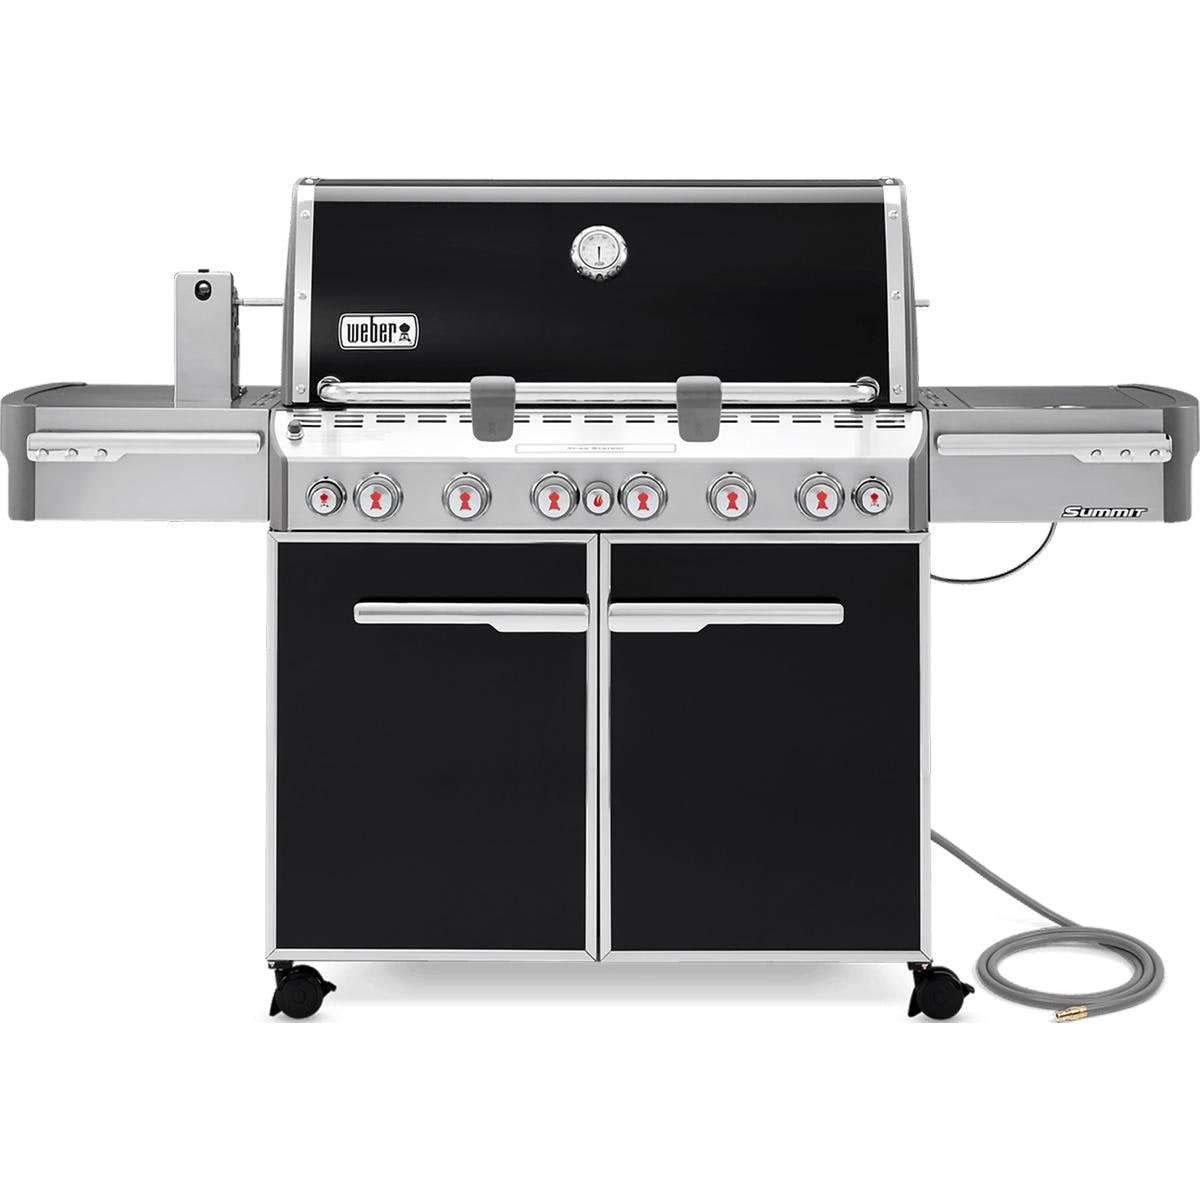 Weber Summit E-670 Gas Grill - image 1 of 6